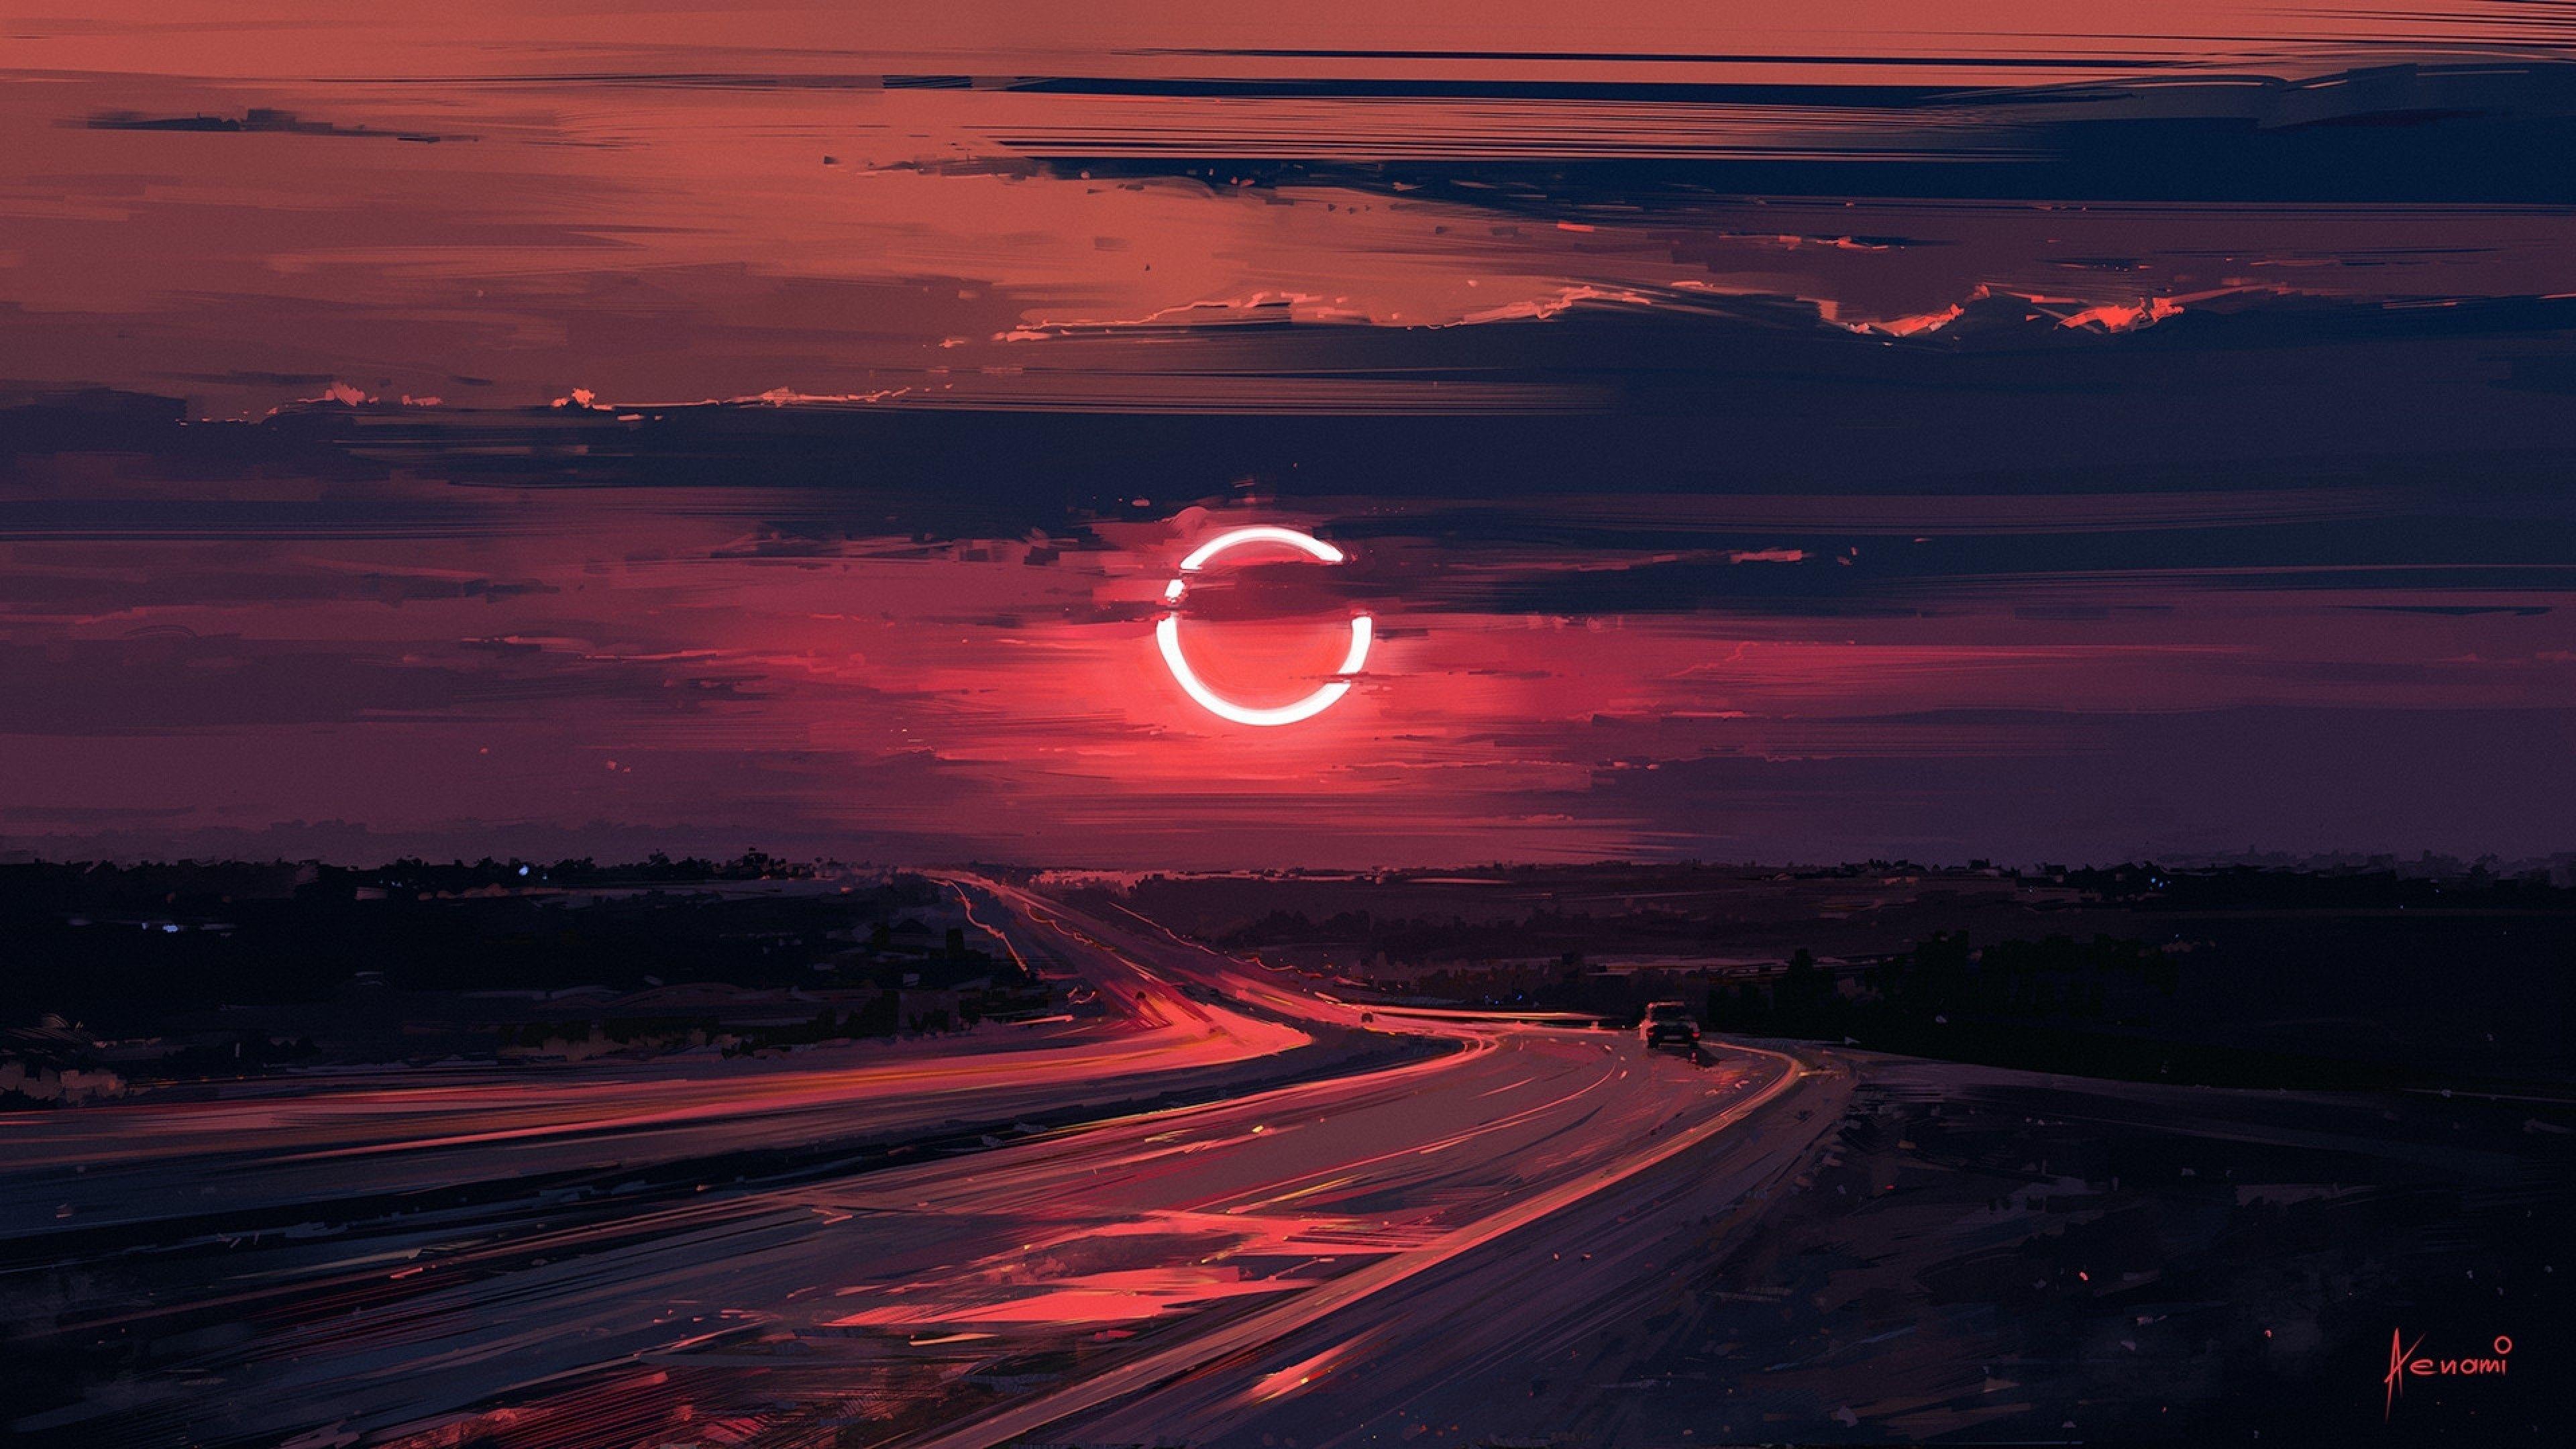 Download 3840x2160 Eclipse, Red Moon, Painting, Road Wallpaper